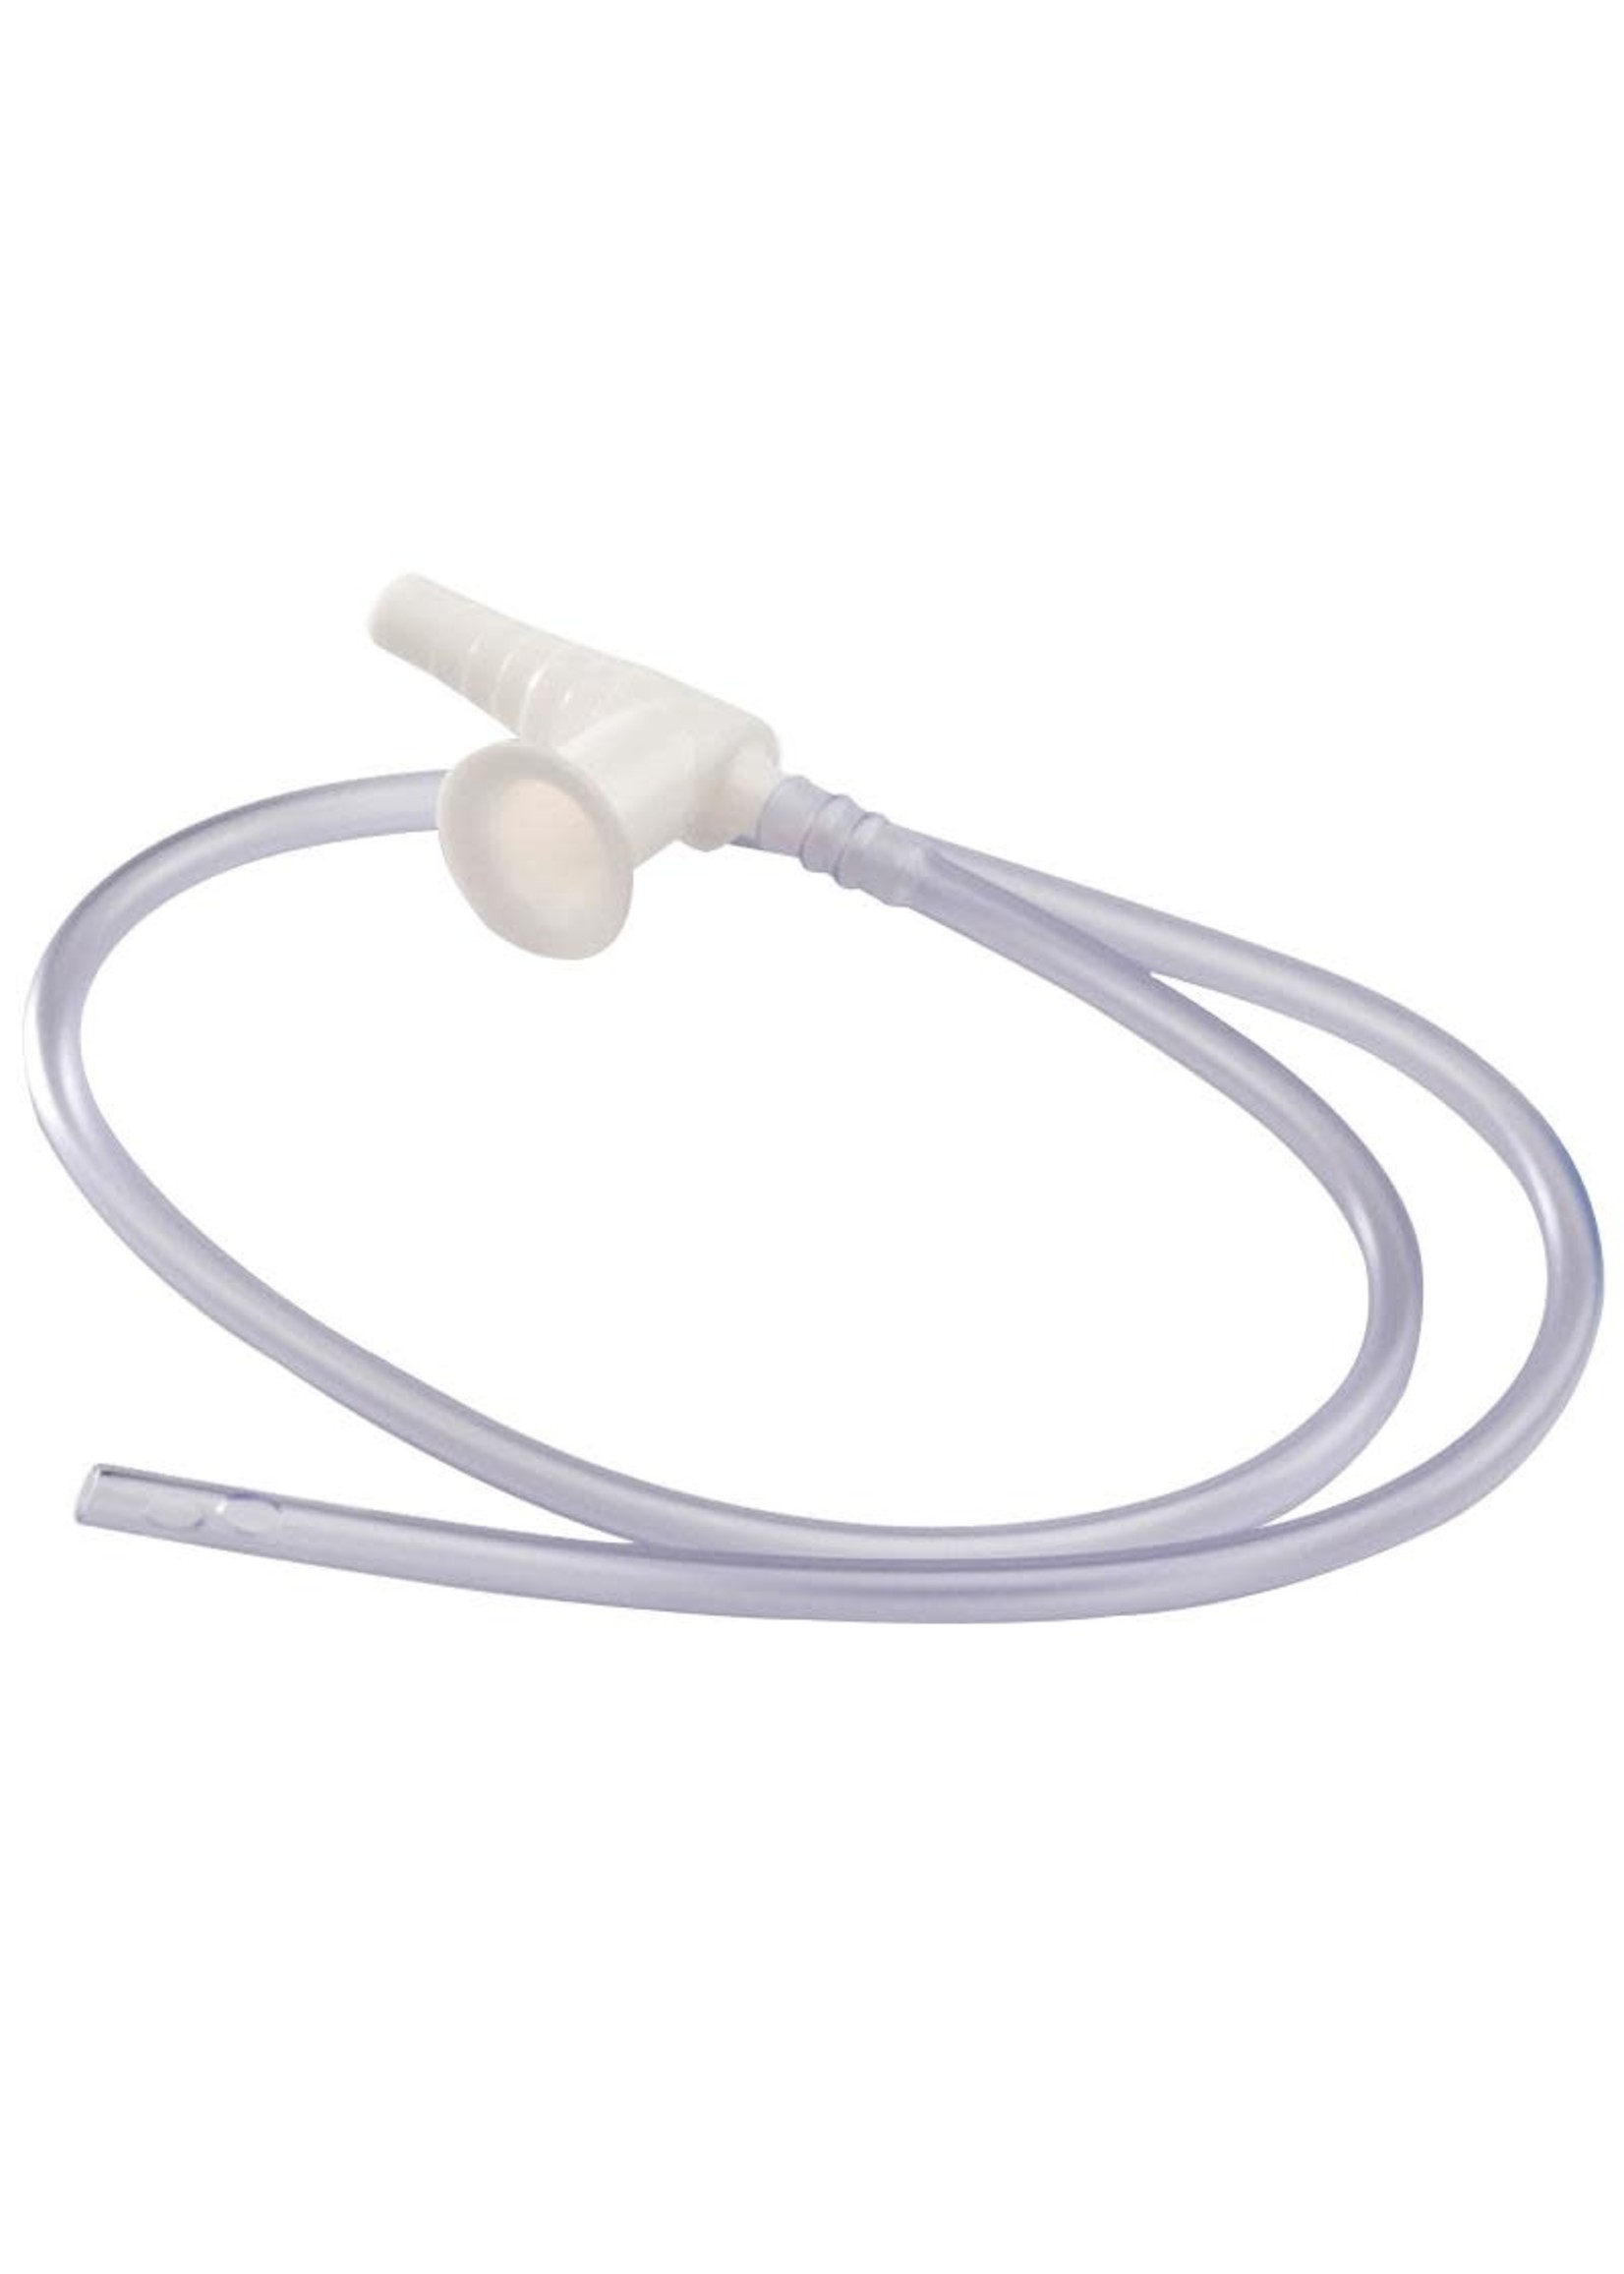 Suction Catheter, 8 French